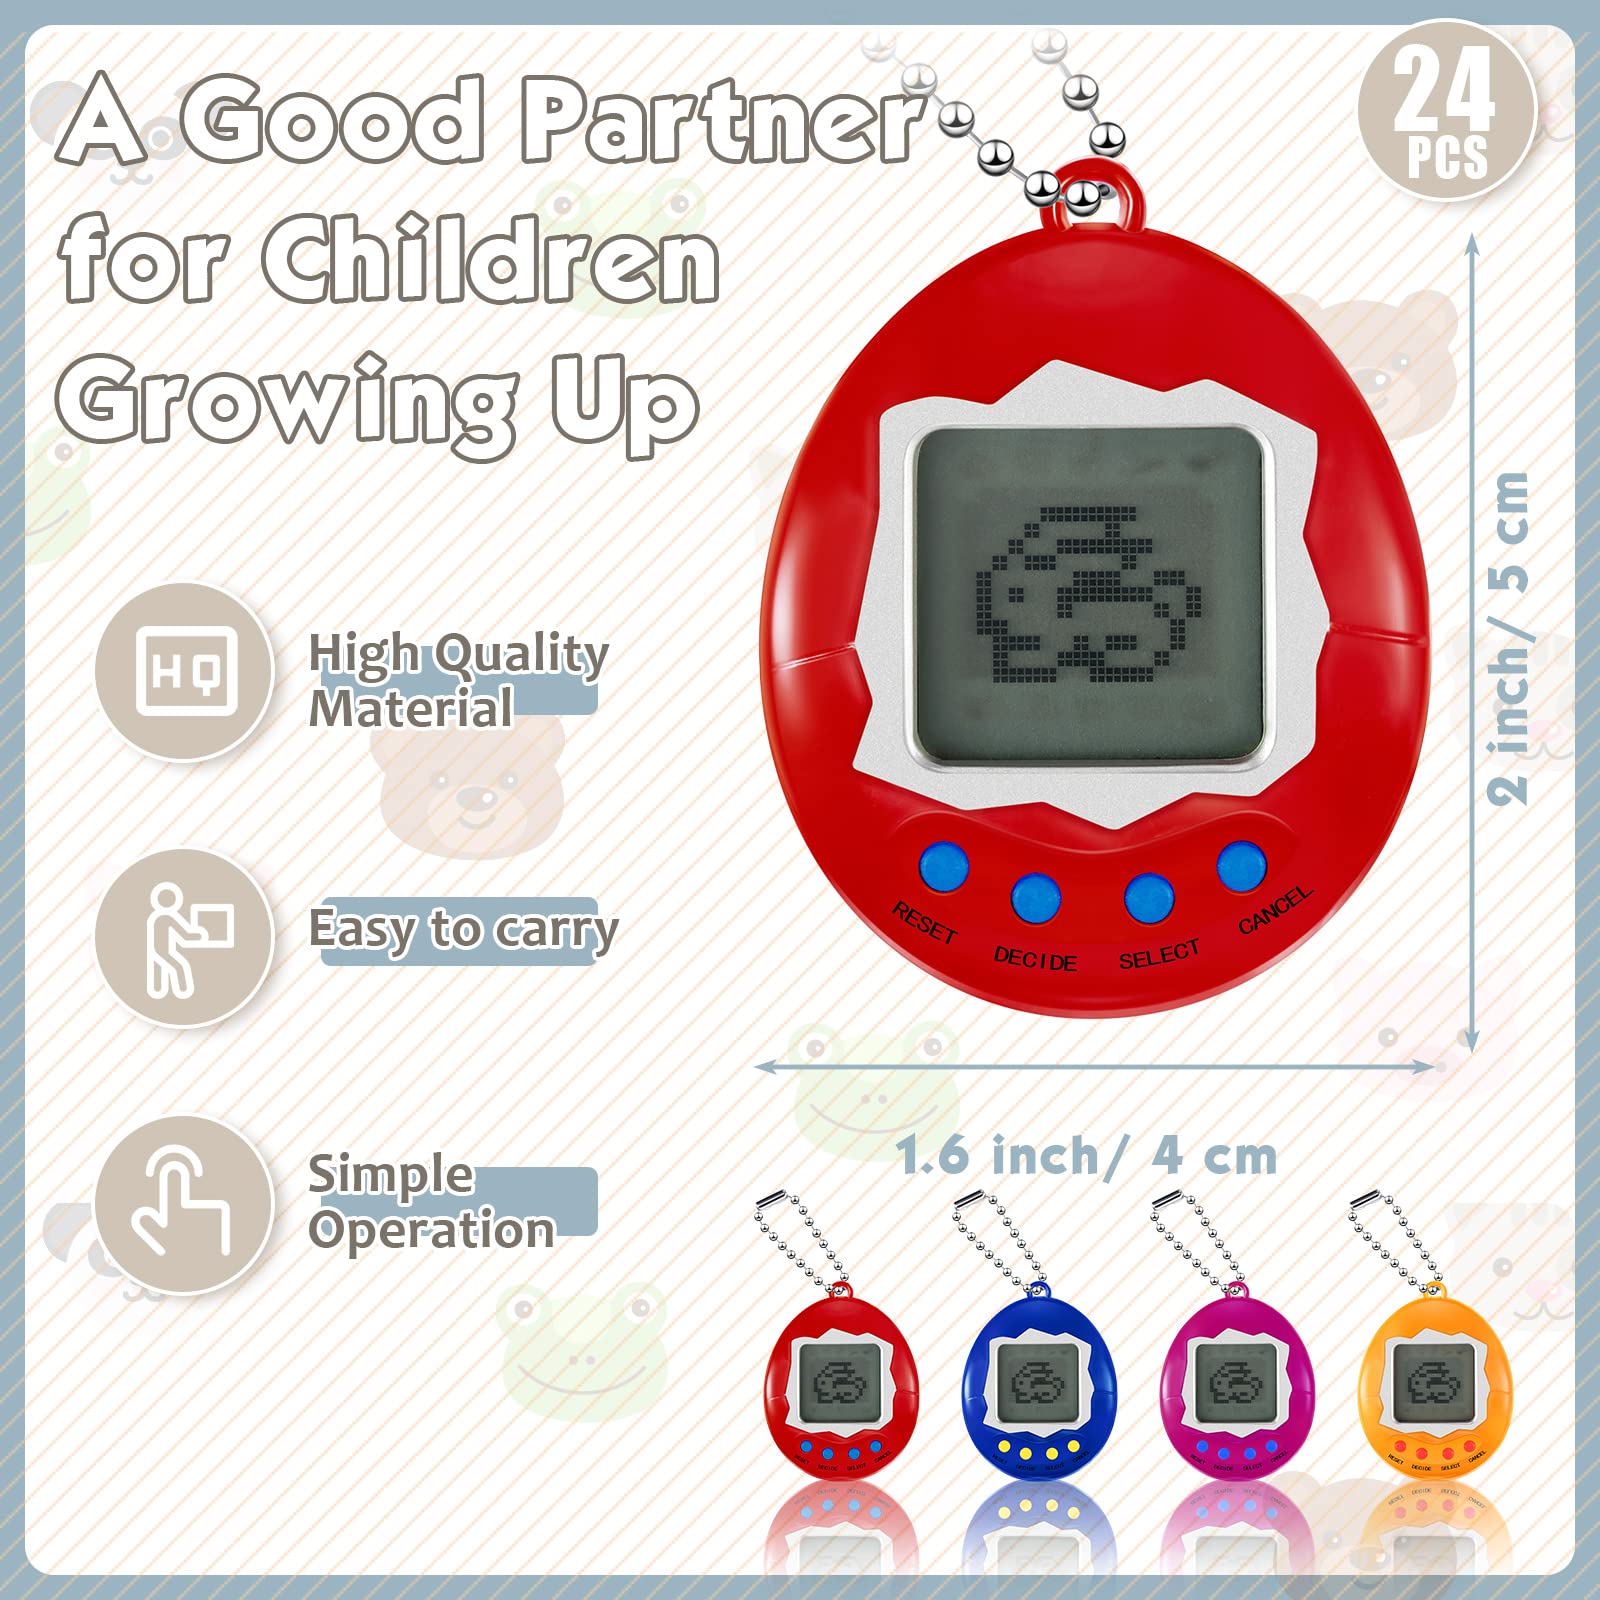 Lewtemi 24 Pieces Virtual Pet Keychains for Kids Electronic Digital Pets 168 Pets Retro Handheld Game Machine Nostalgic 90s Toy for Halloween Christmas